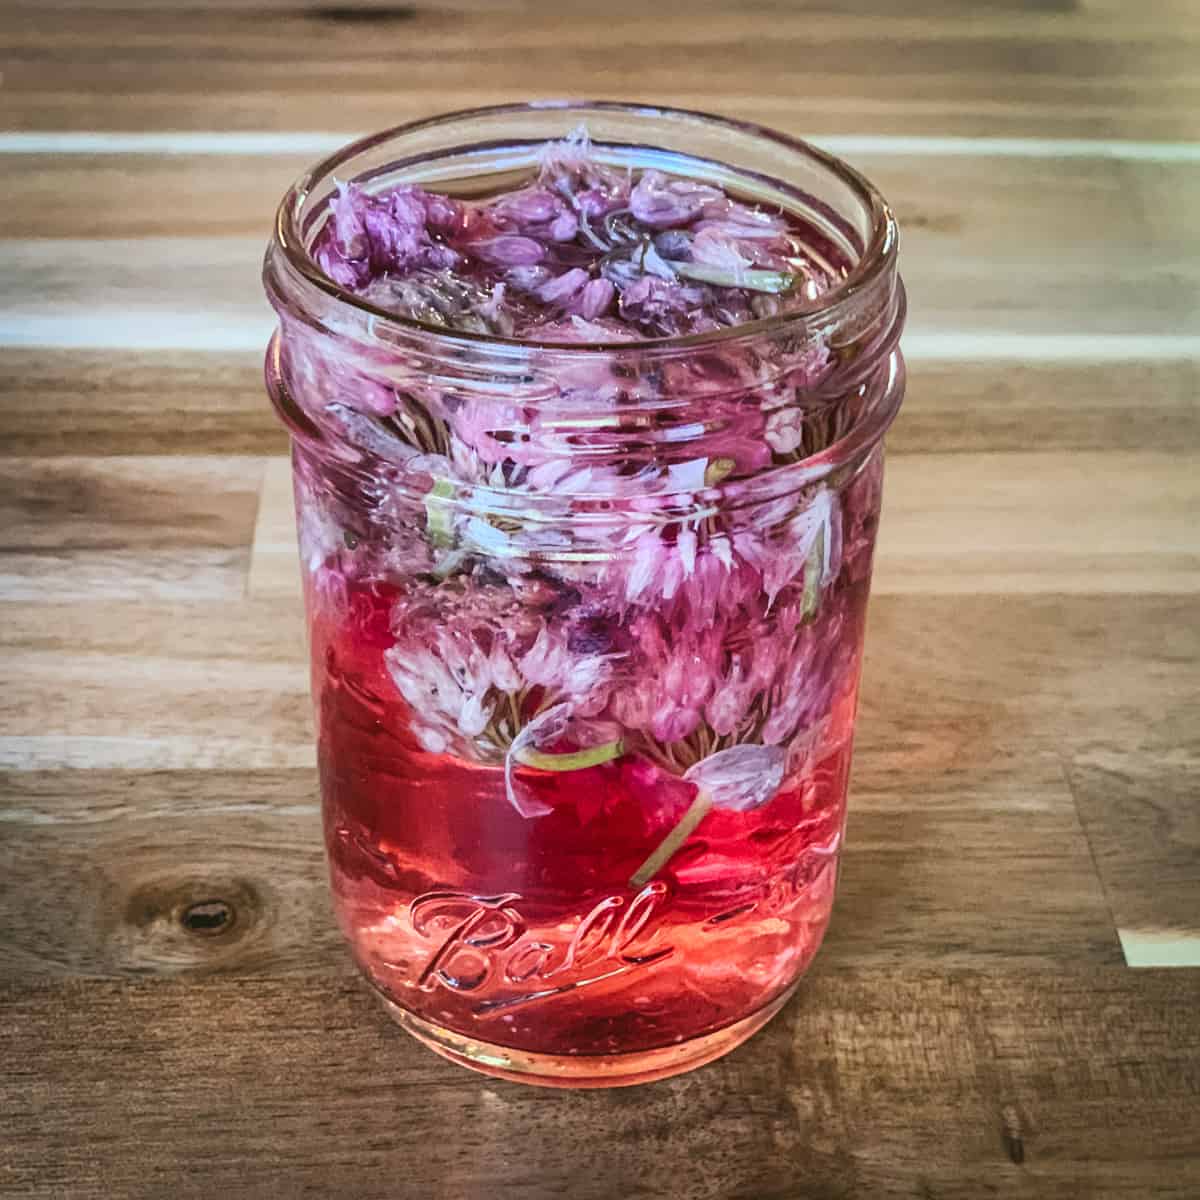 A jar of chive blossom infused vinegar.